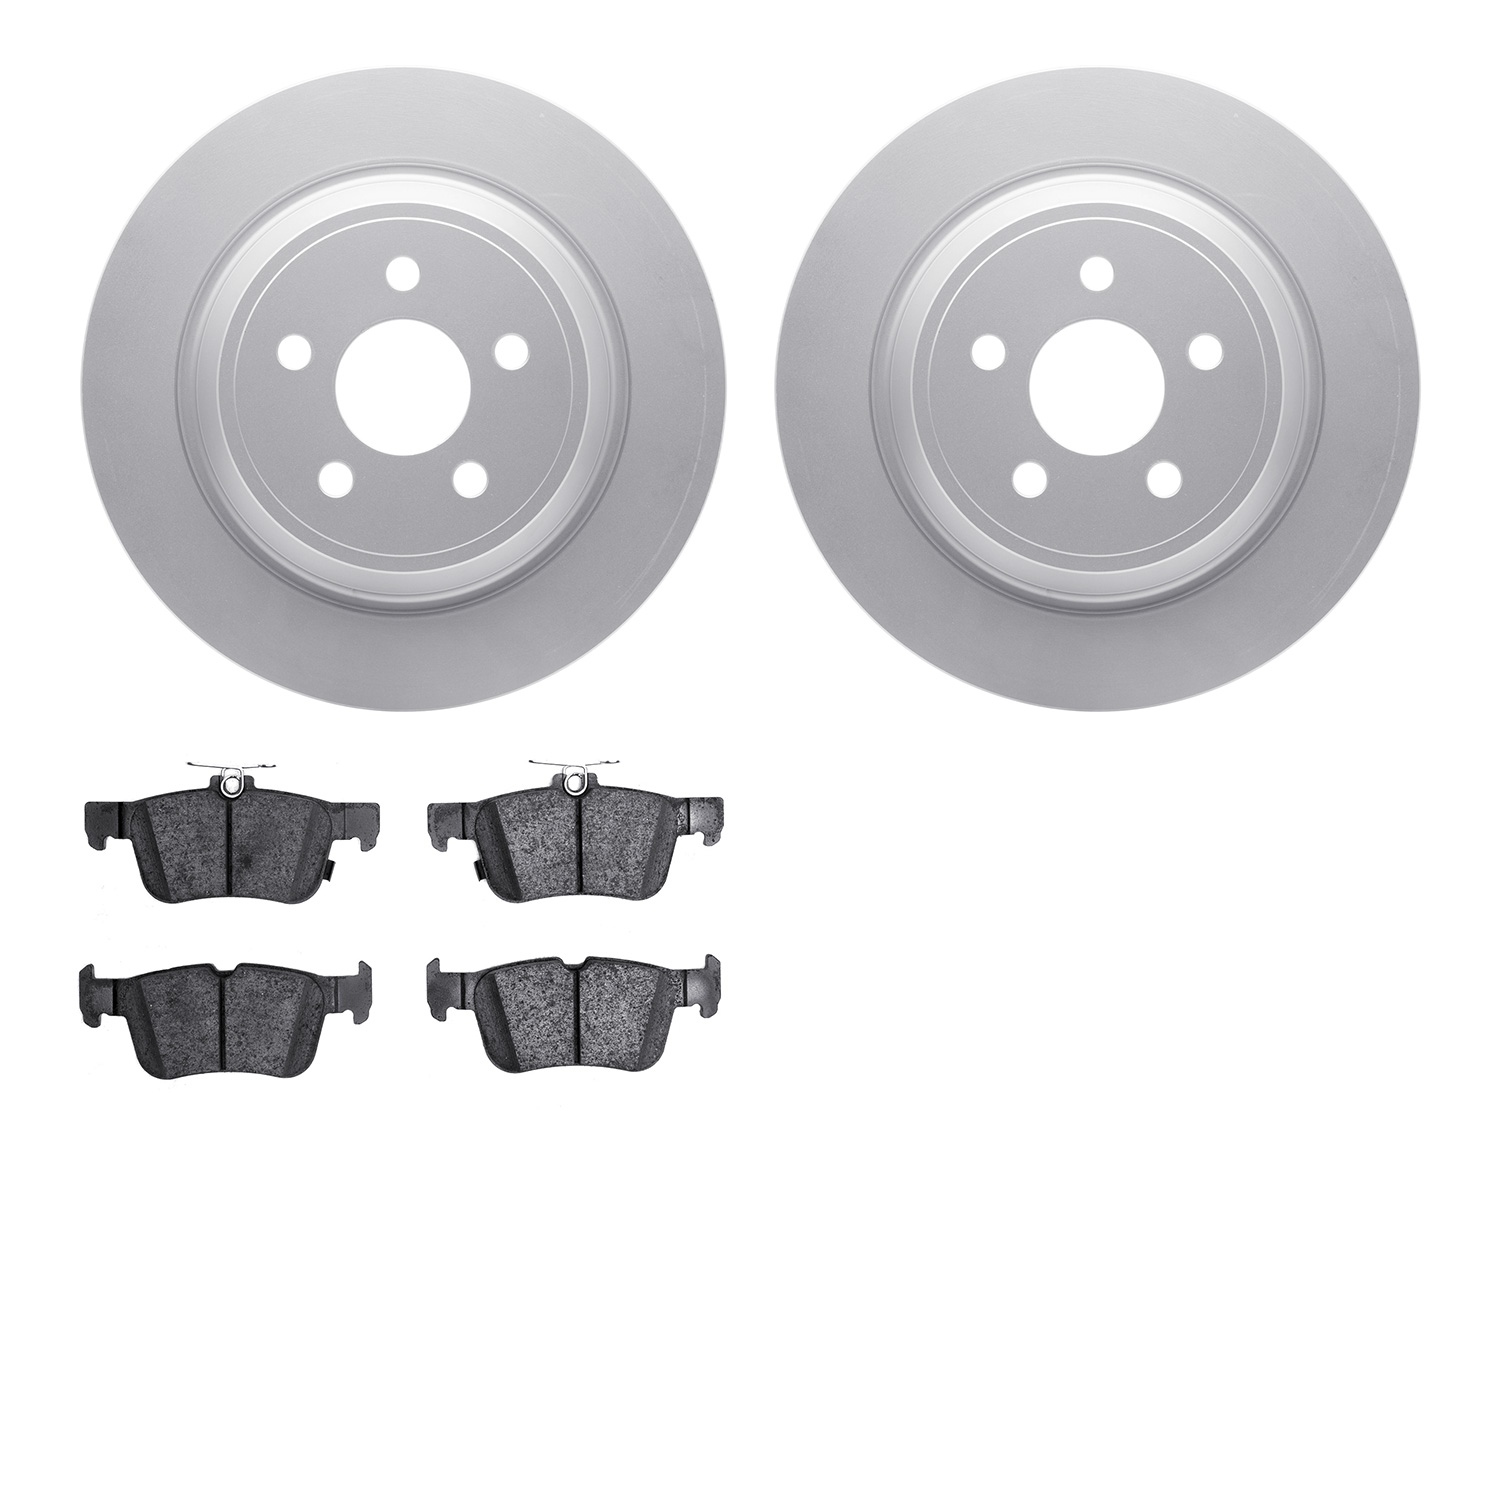 4302-55006 Geospec Brake Rotors with 3000-Series Ceramic Brake Pads Kit, Fits Select Ford/Lincoln/Mercury/Mazda, Position: Rear